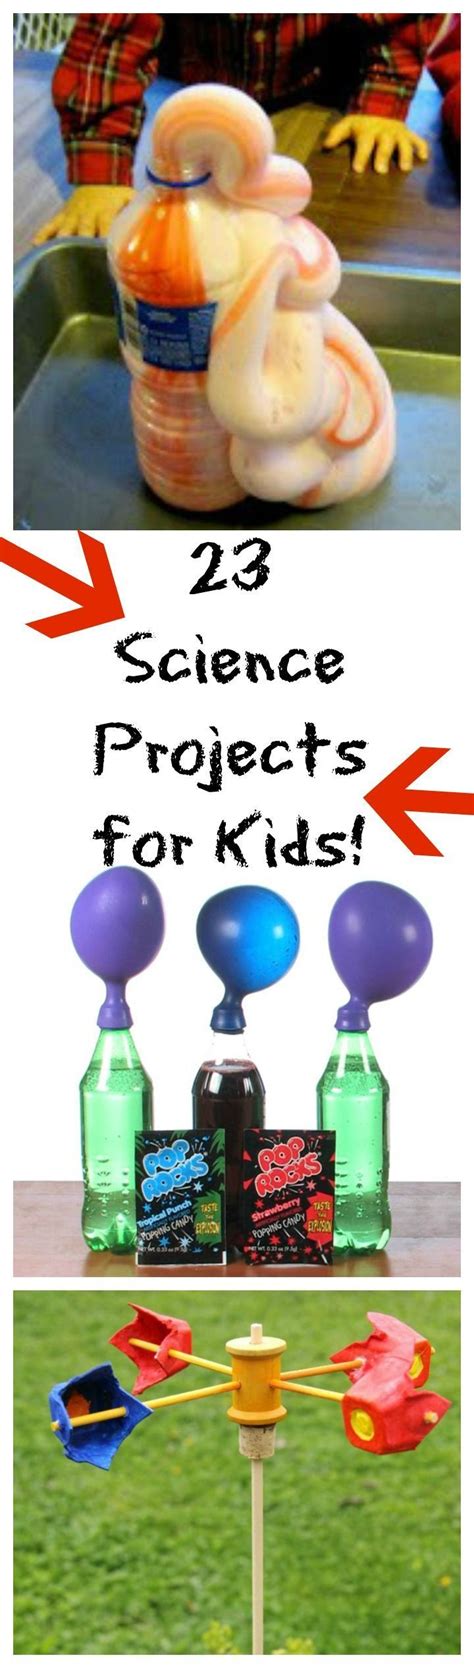 23 Science Projects For Kids Science Projects For Kids Science For